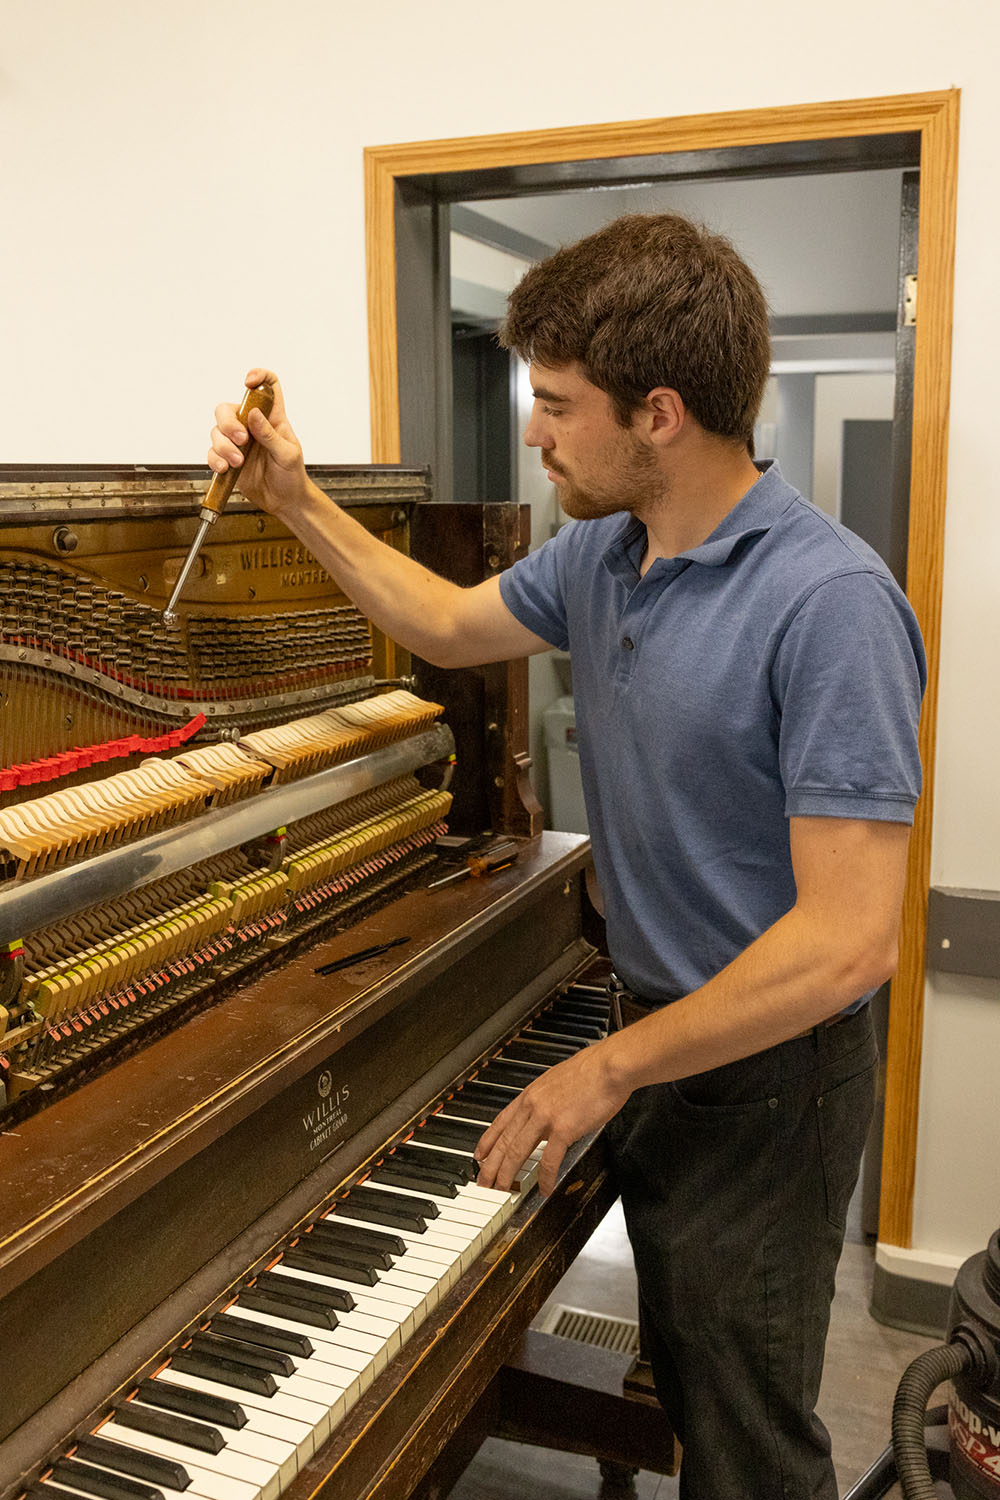 A young man tuning a piano